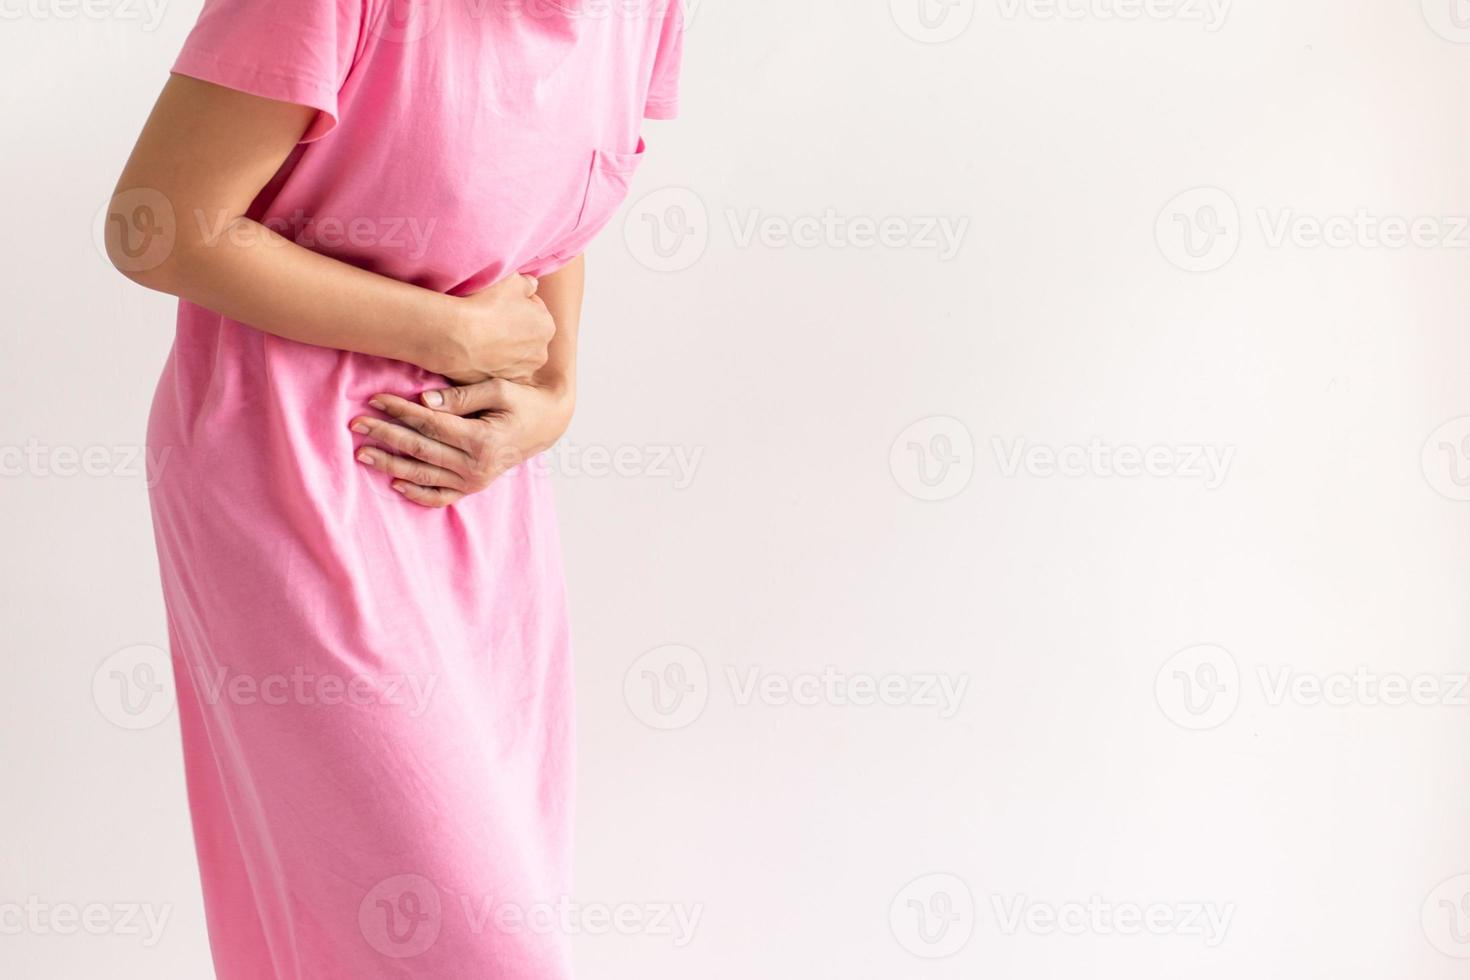 Woman suffering from stomach pain isolated in white background. photo